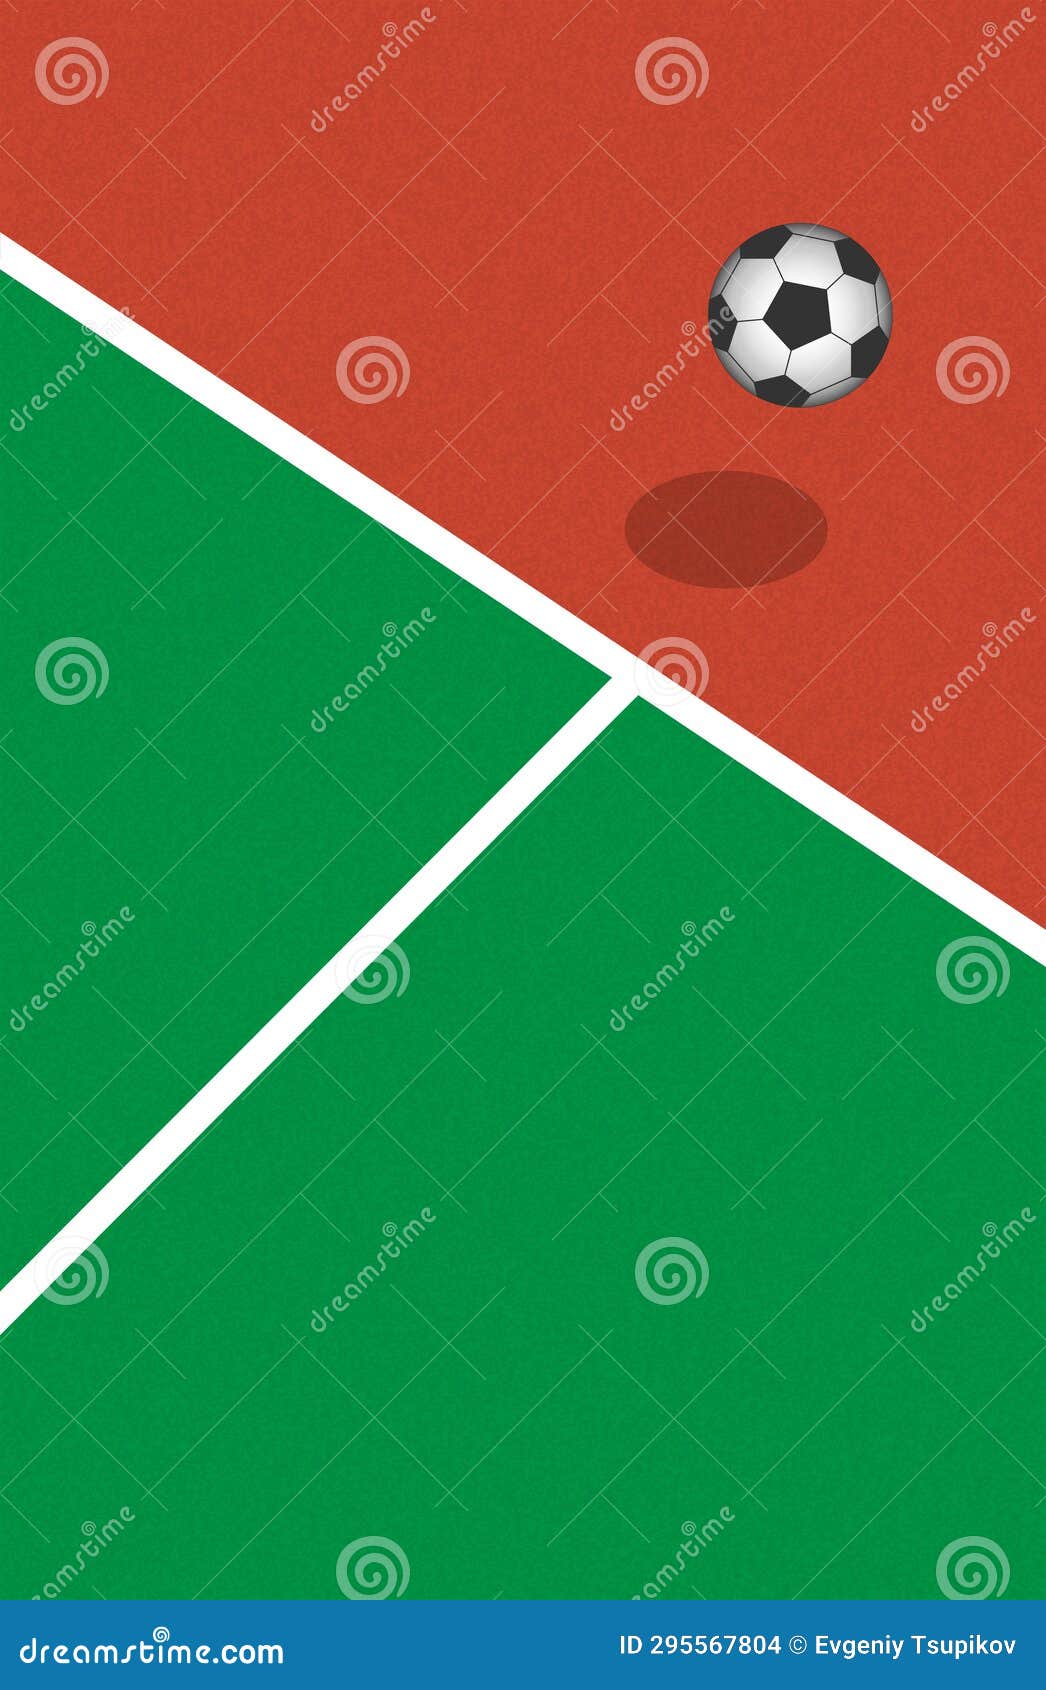 Soccer or football field size Royalty Free Vector Image